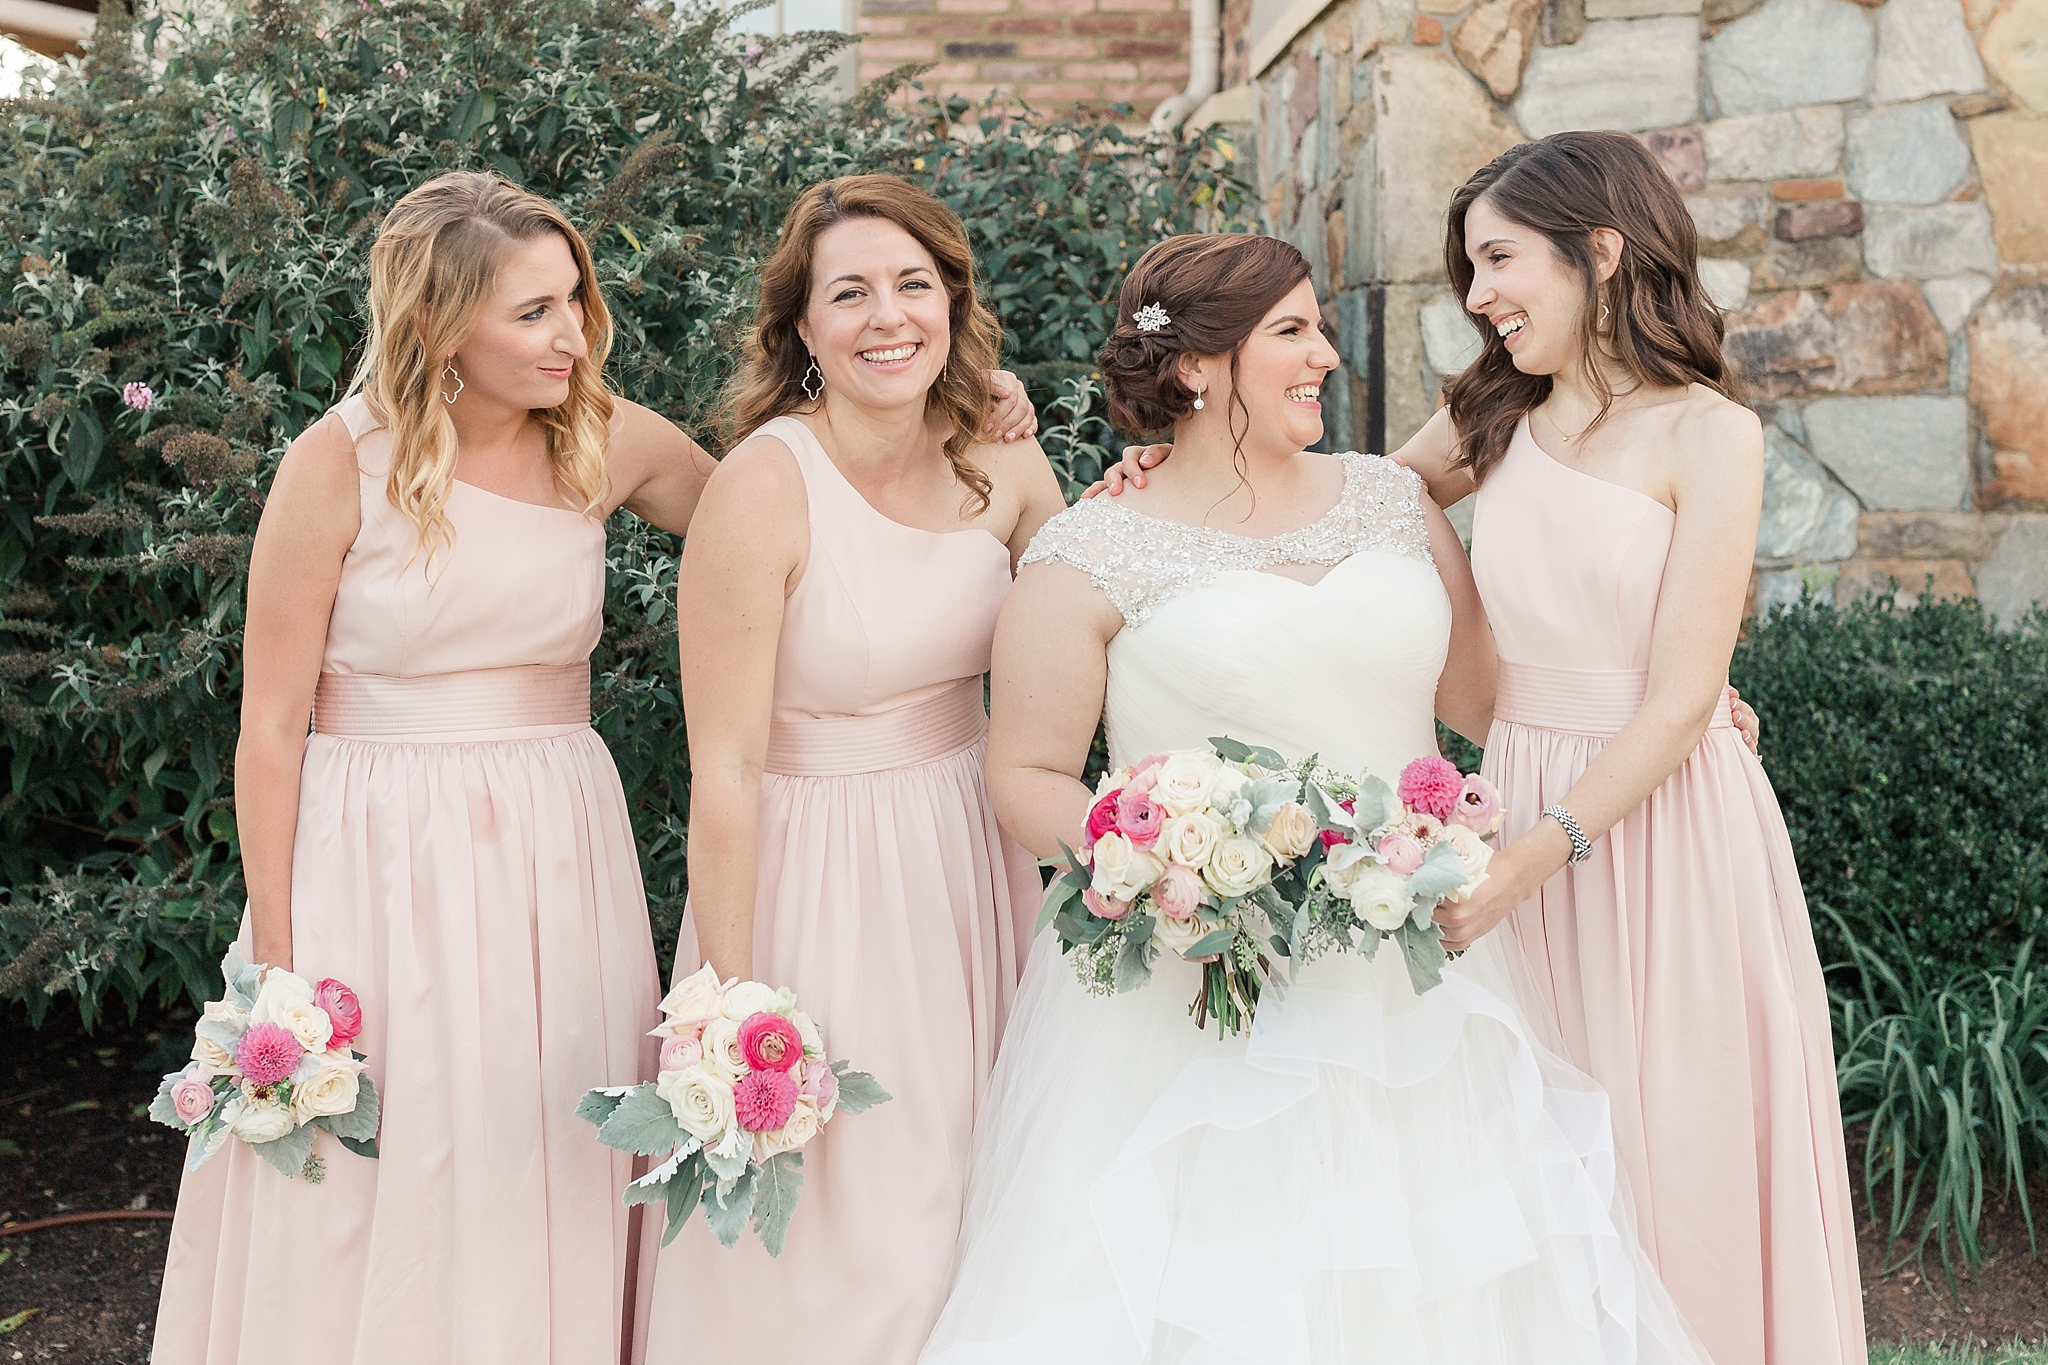 A classic Kate Spade themed wedding at Early Mountain Vineyards in Madison, VA.